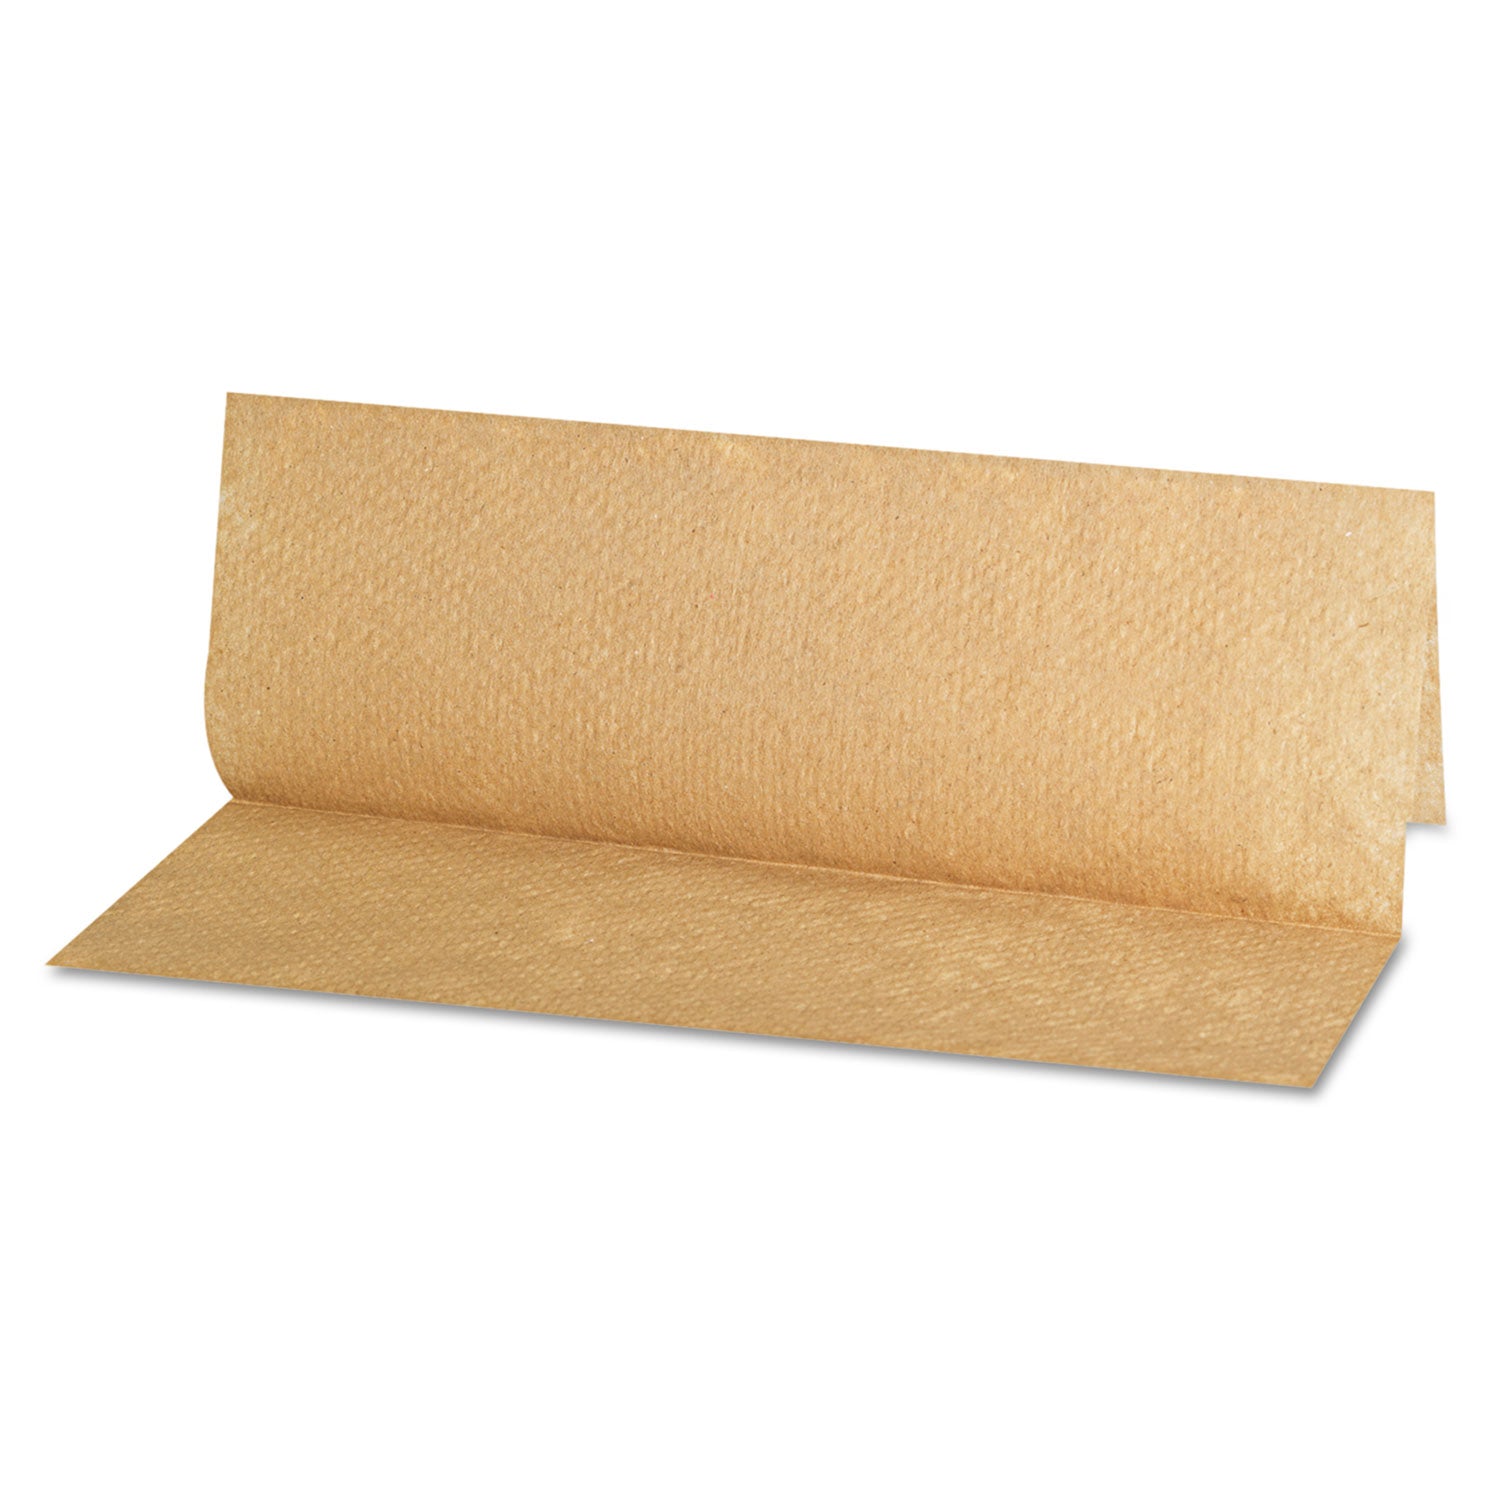 Folded Paper Towels, Multifold, 9 x 9.45, Natural, 250 Towels/Pack, 16 Packs/Carton - 